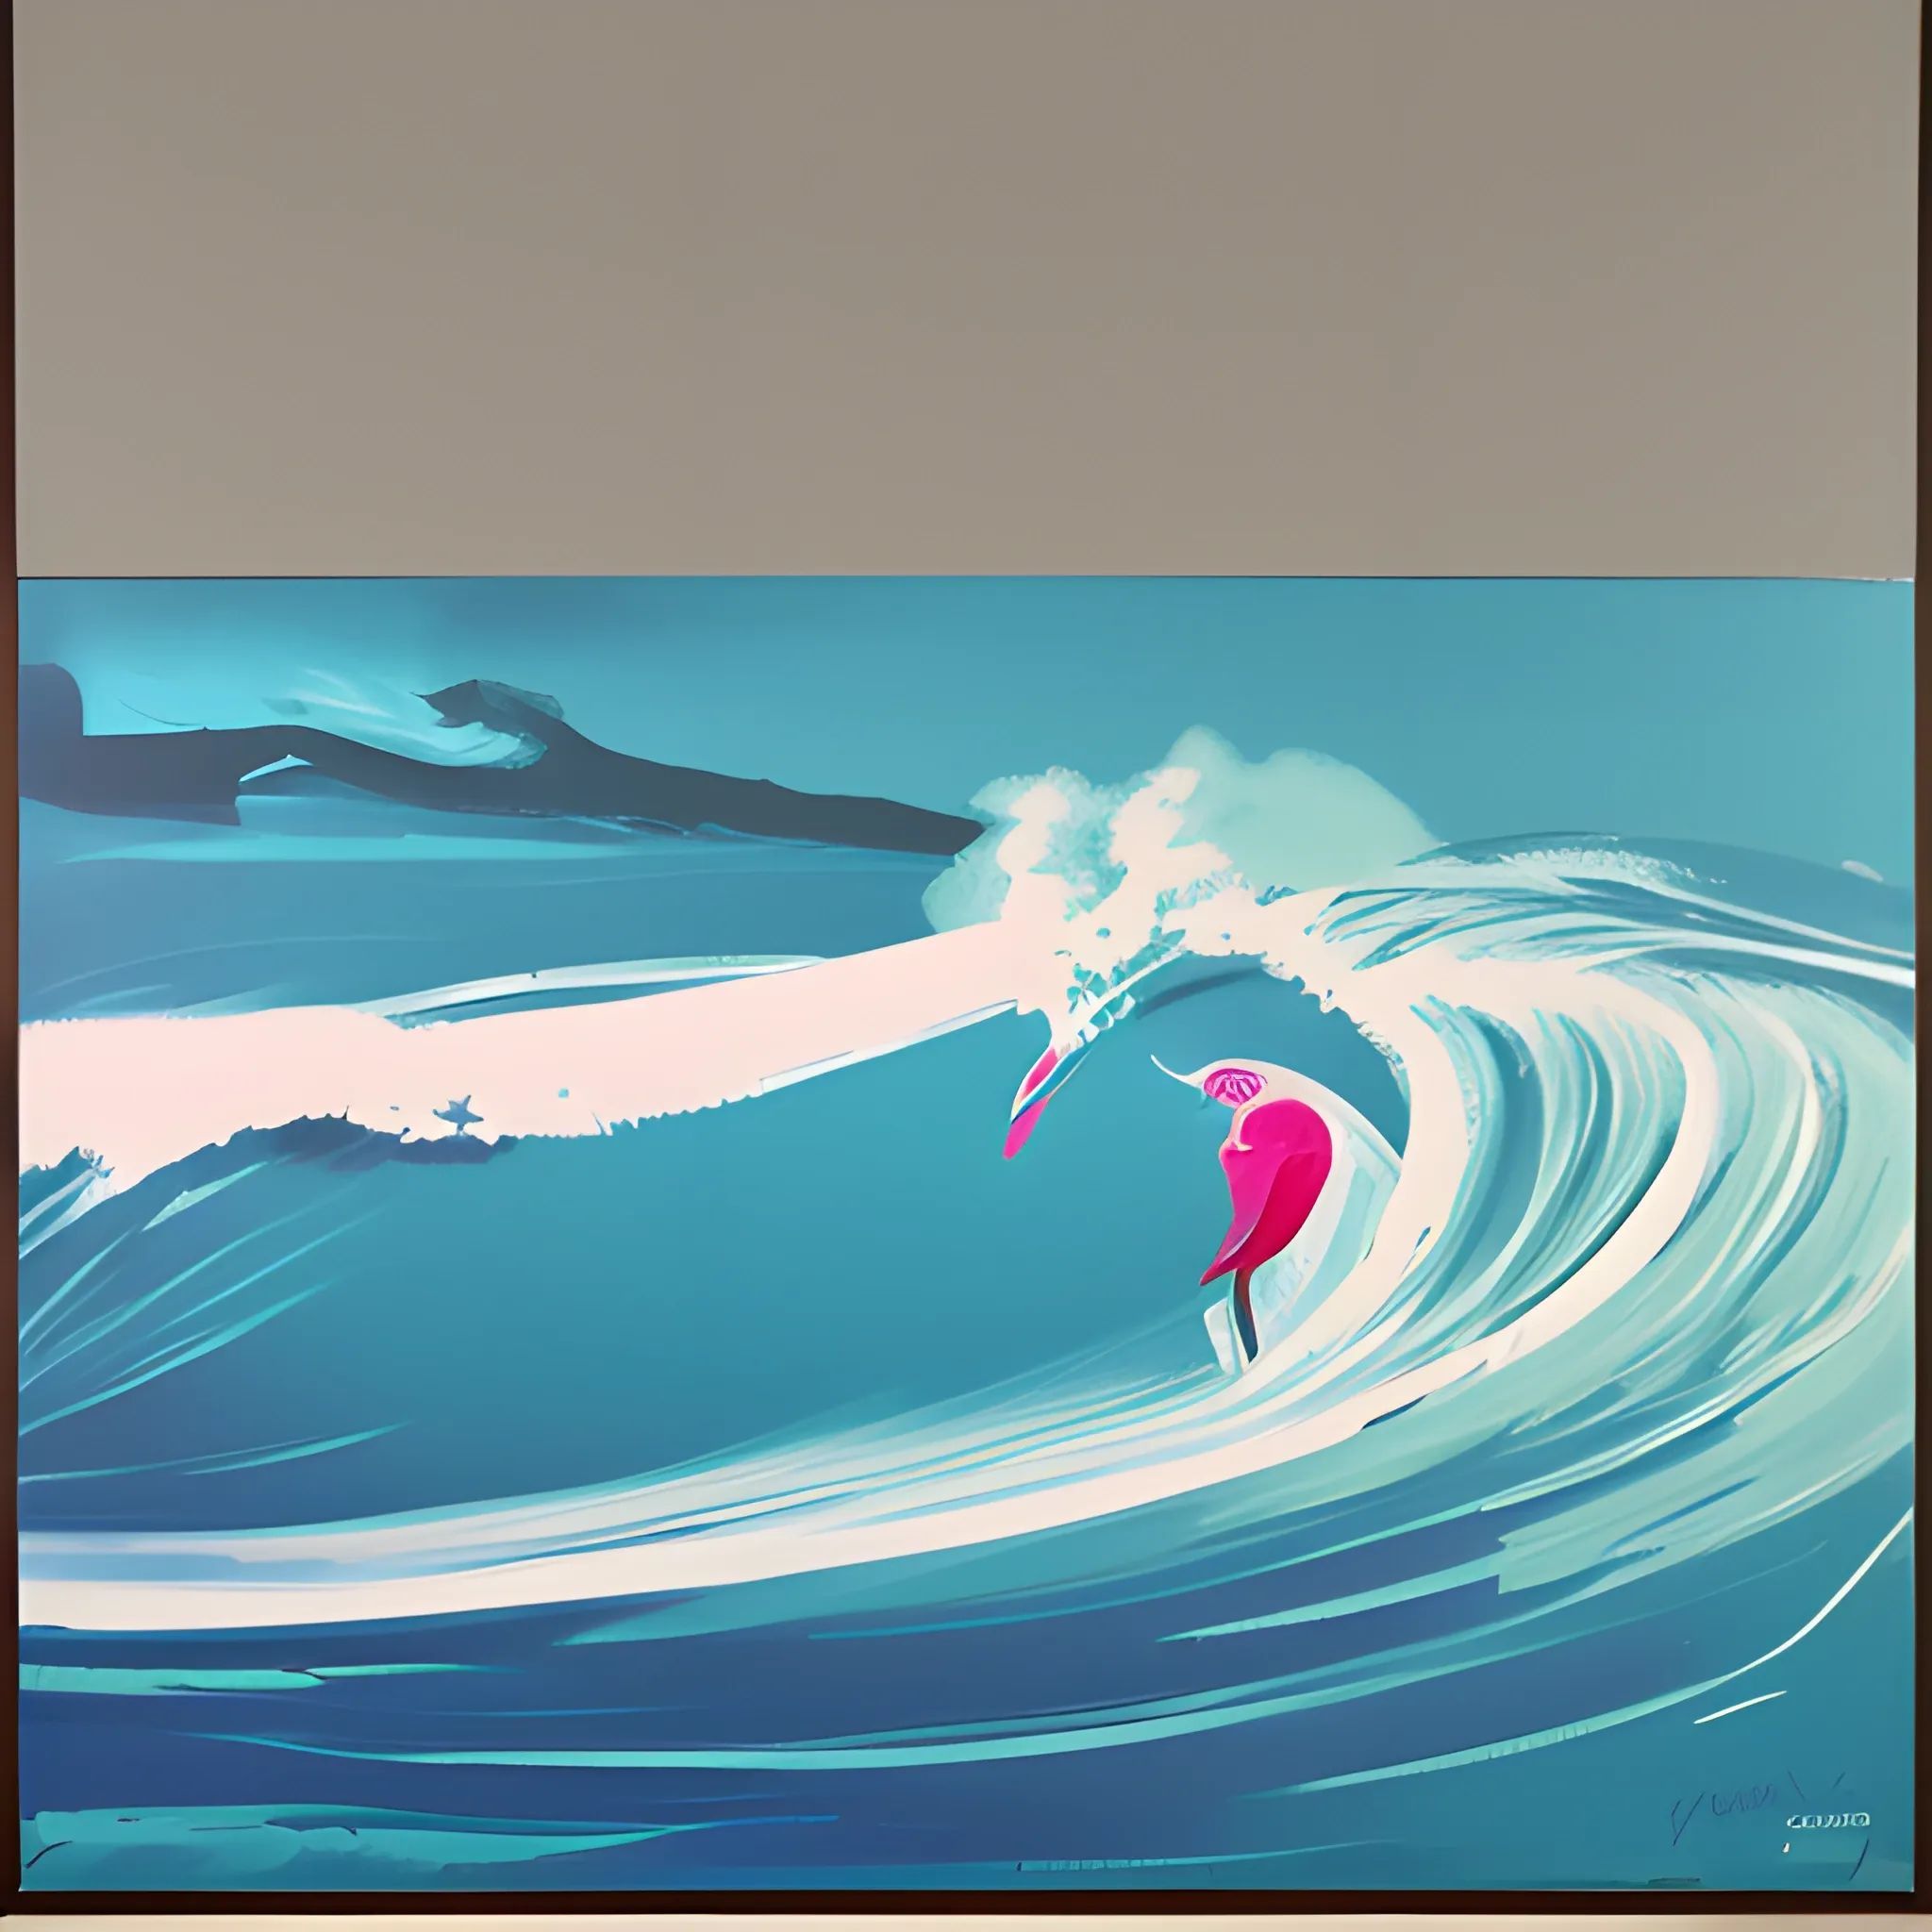 warhol painting that capture the essence of surfing